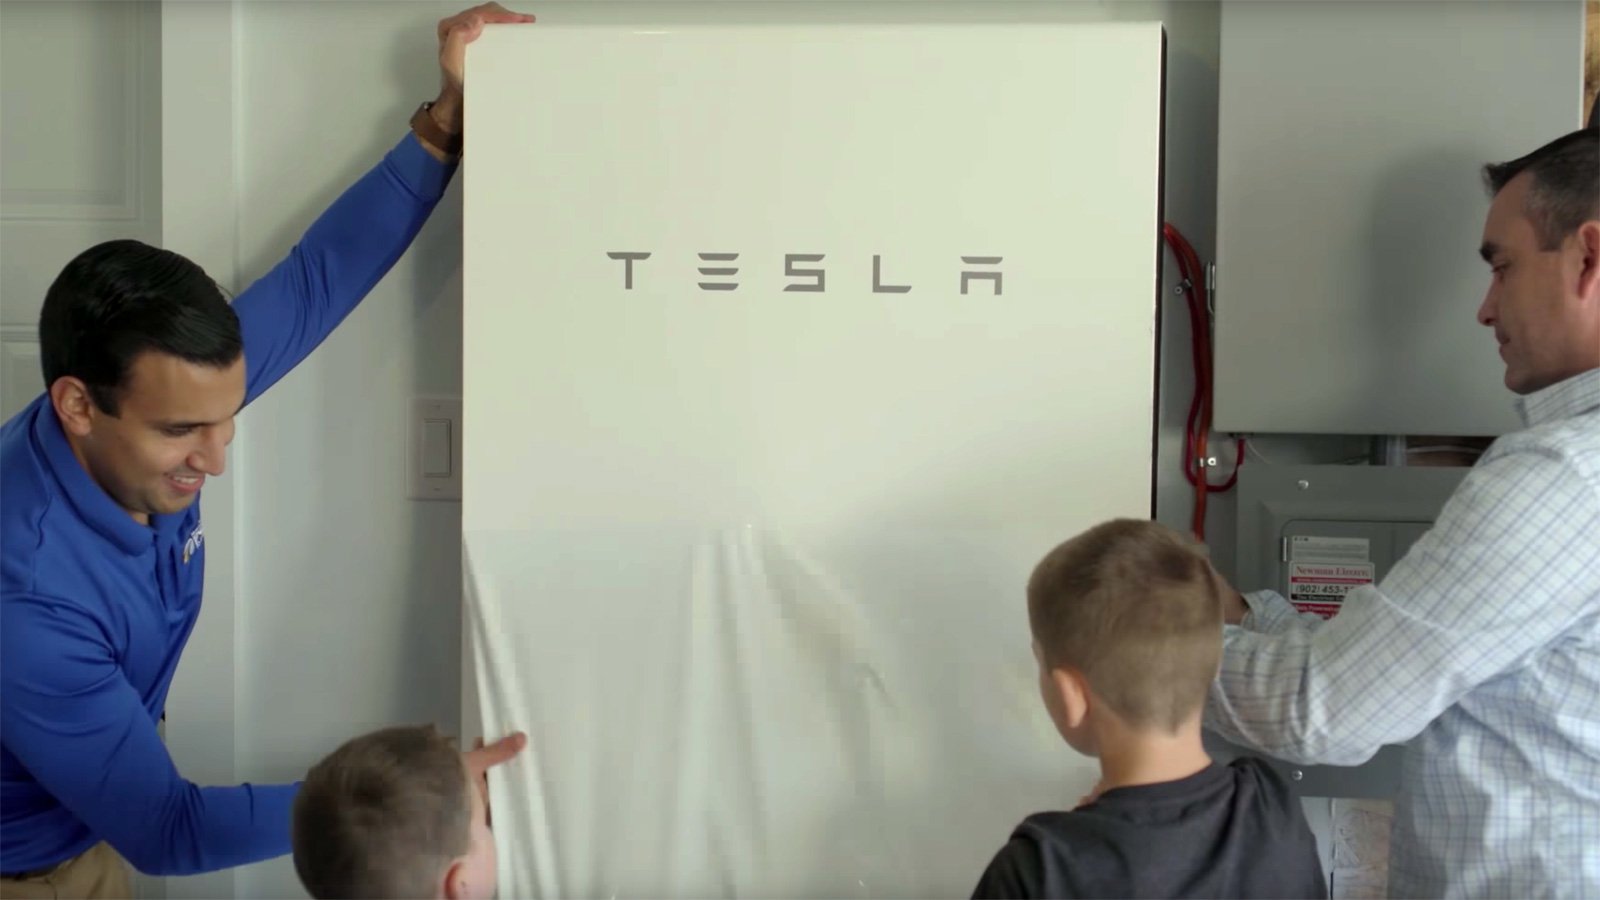 Tesla has launched another energy experiment in Canada